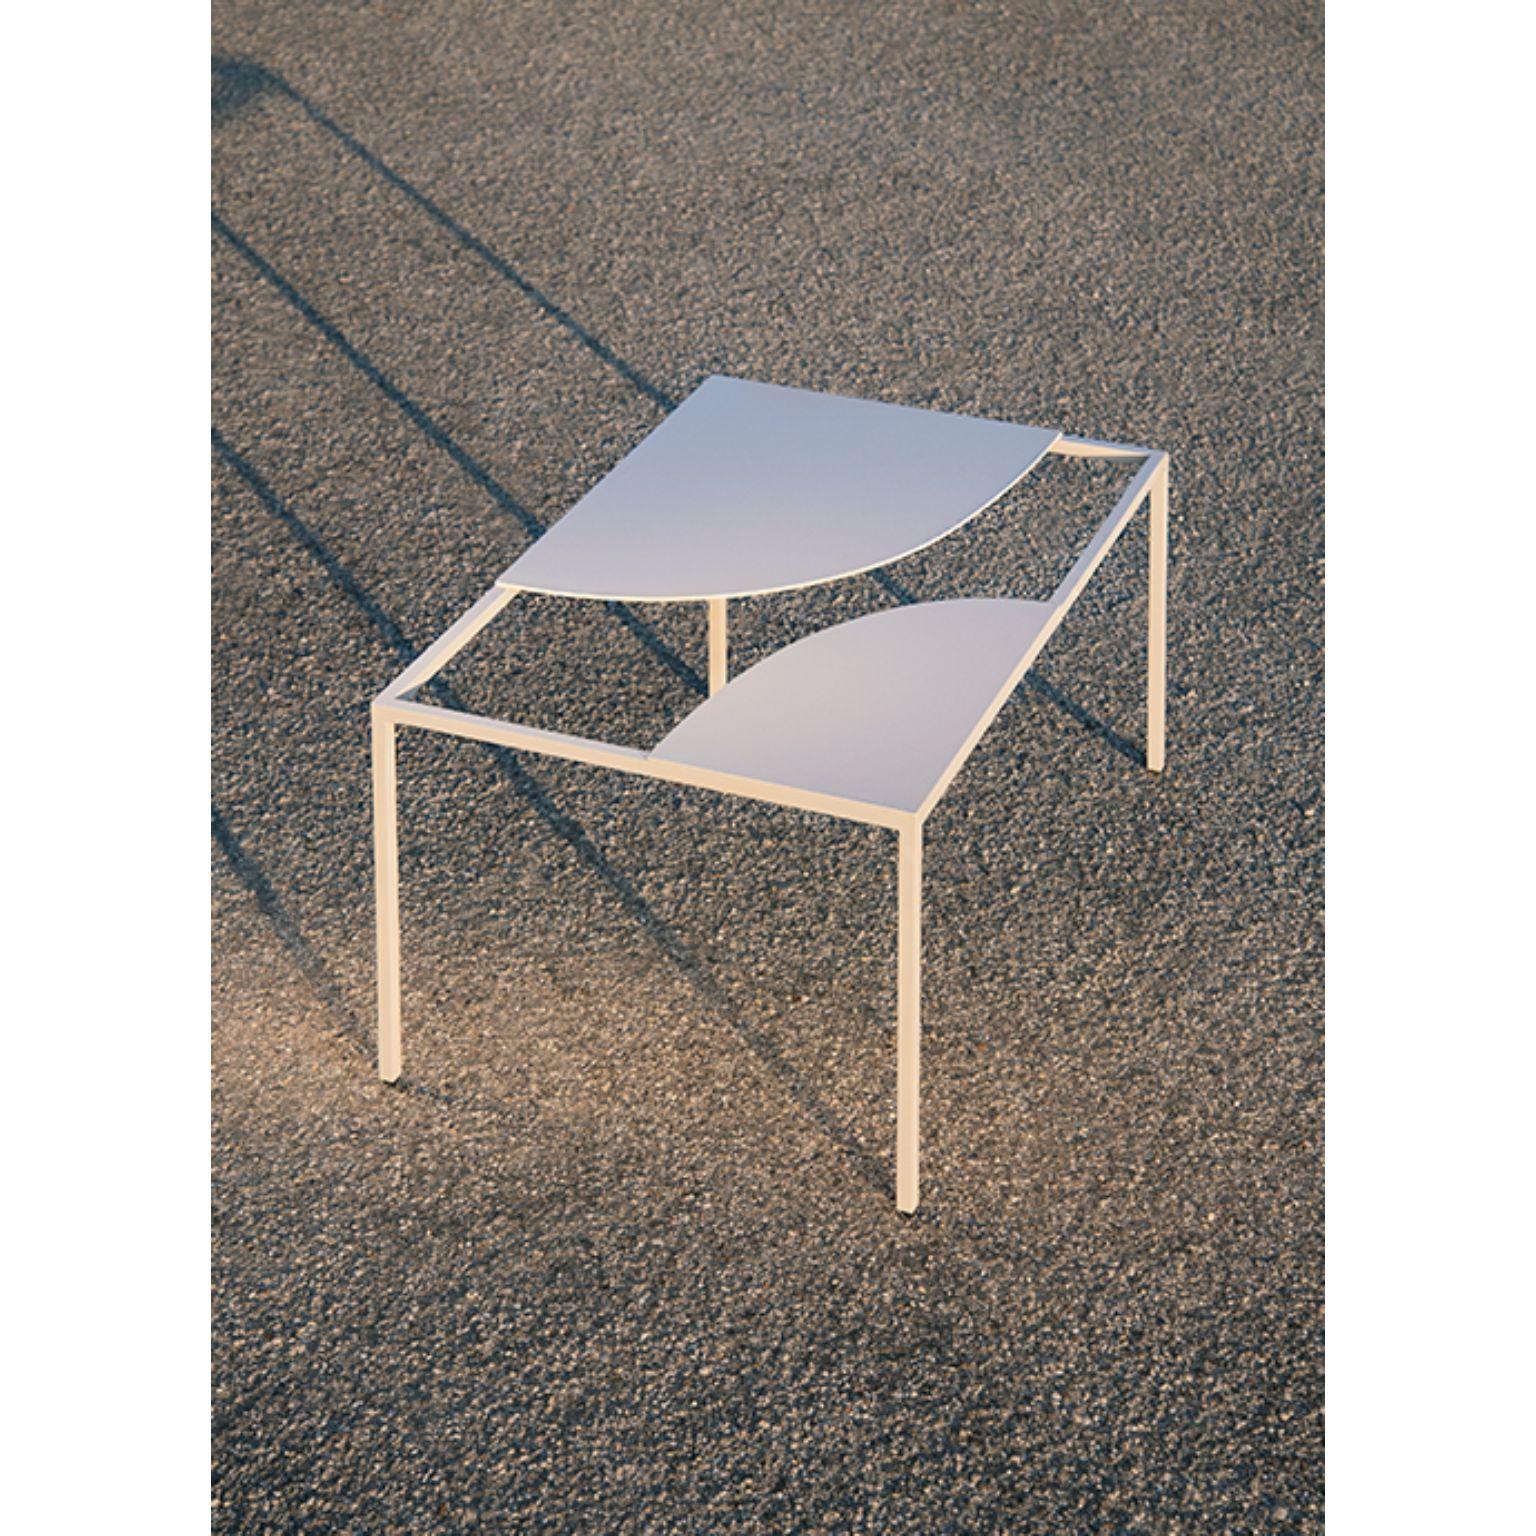 Creek coffee table by Nendo
Materials: Top: Powder coated metal
 Structure: Chrome metal
Dimensions: W90 x D60 x H31.7 cm

Creek is a table that suggests a stream of water flowing freely across its surface and around islands,
circling around